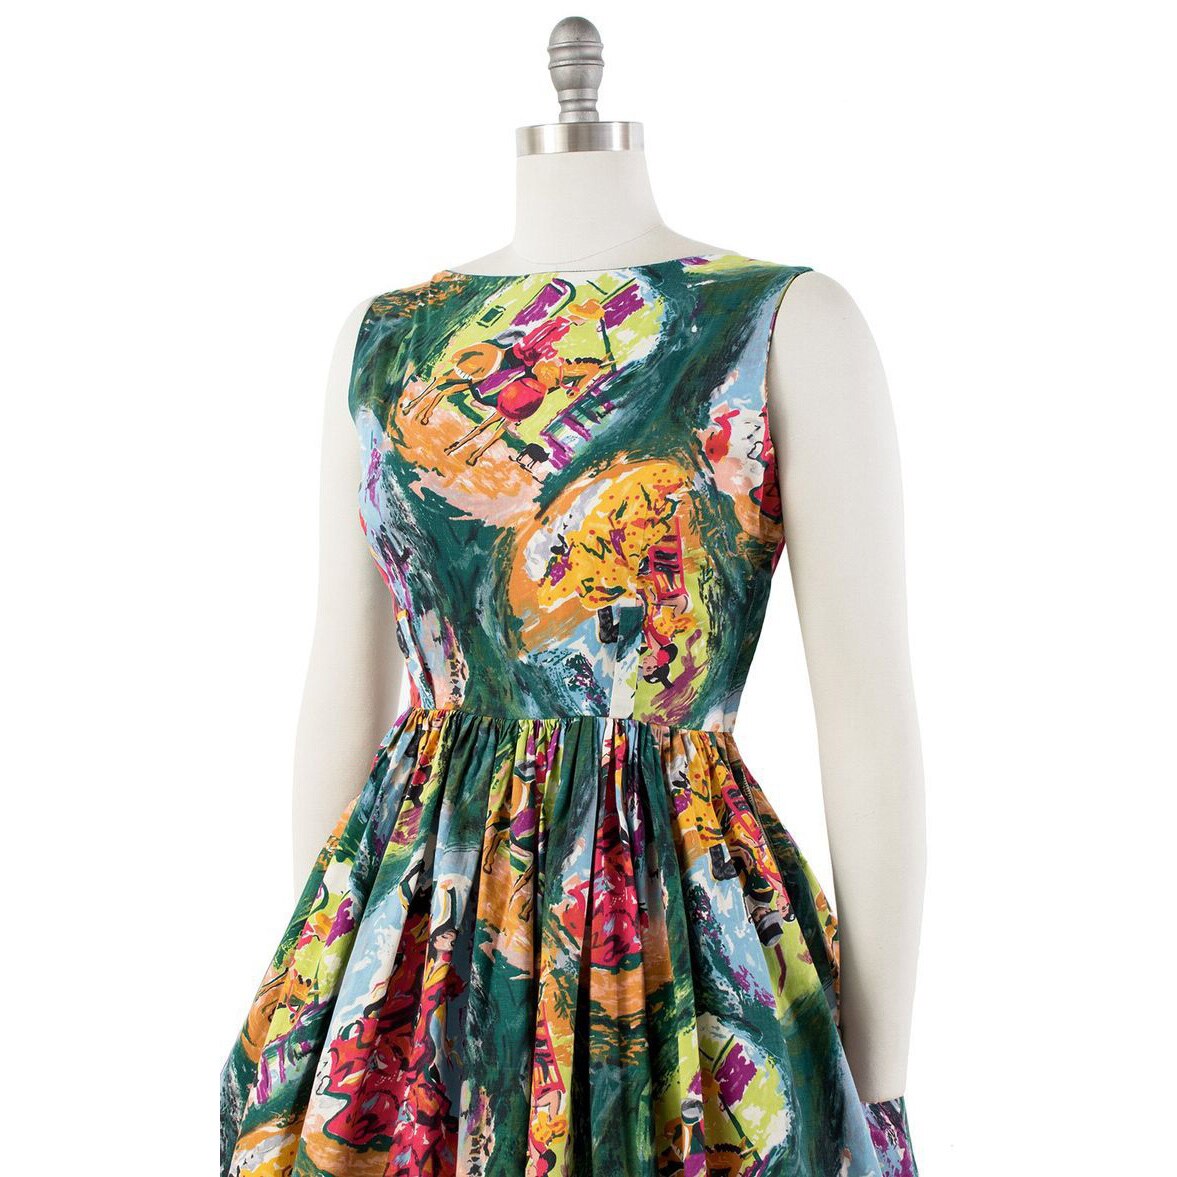 Green Retro Vintage Women 50s Party Dress Sleeveless Fashion Runway Summer Sexy Floral Printed Sundress Rockabilly Clothing 60s